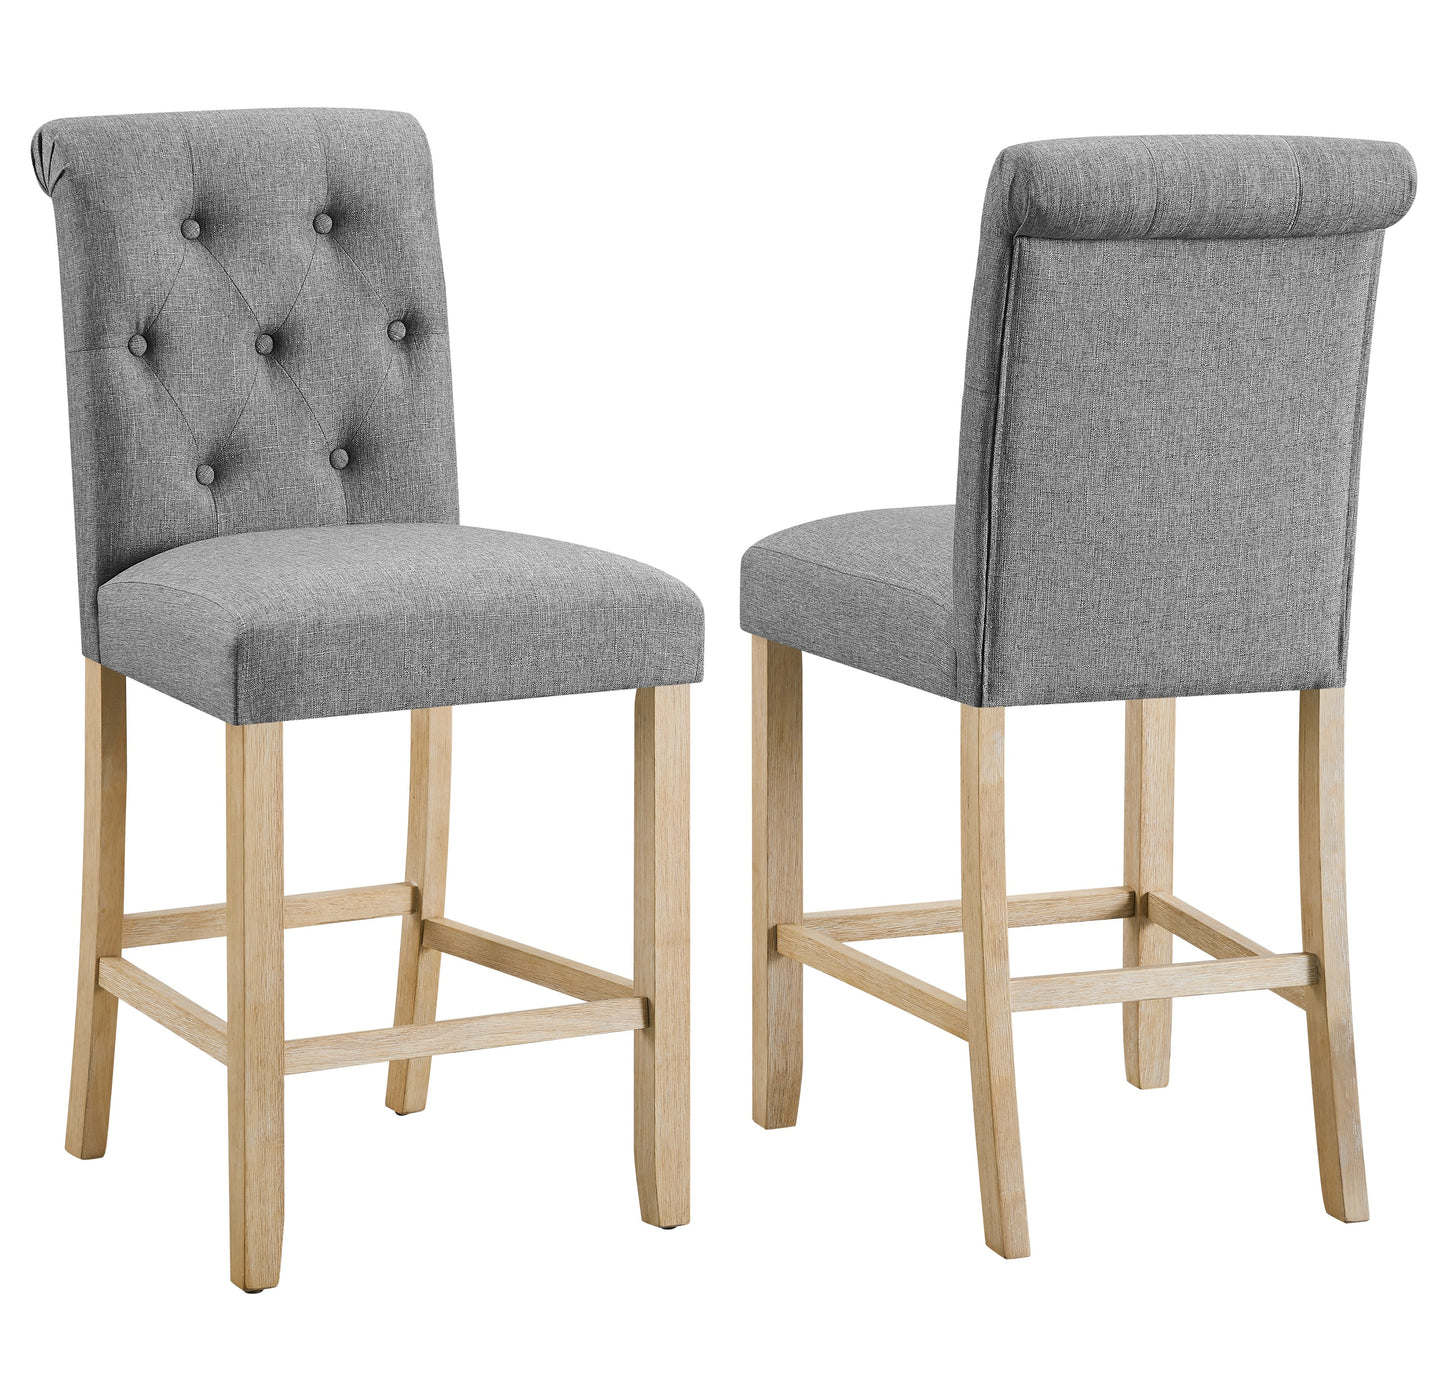 Siena Counter Height Button Tufted Back Solid Wood Stools, Set of 2, Gray